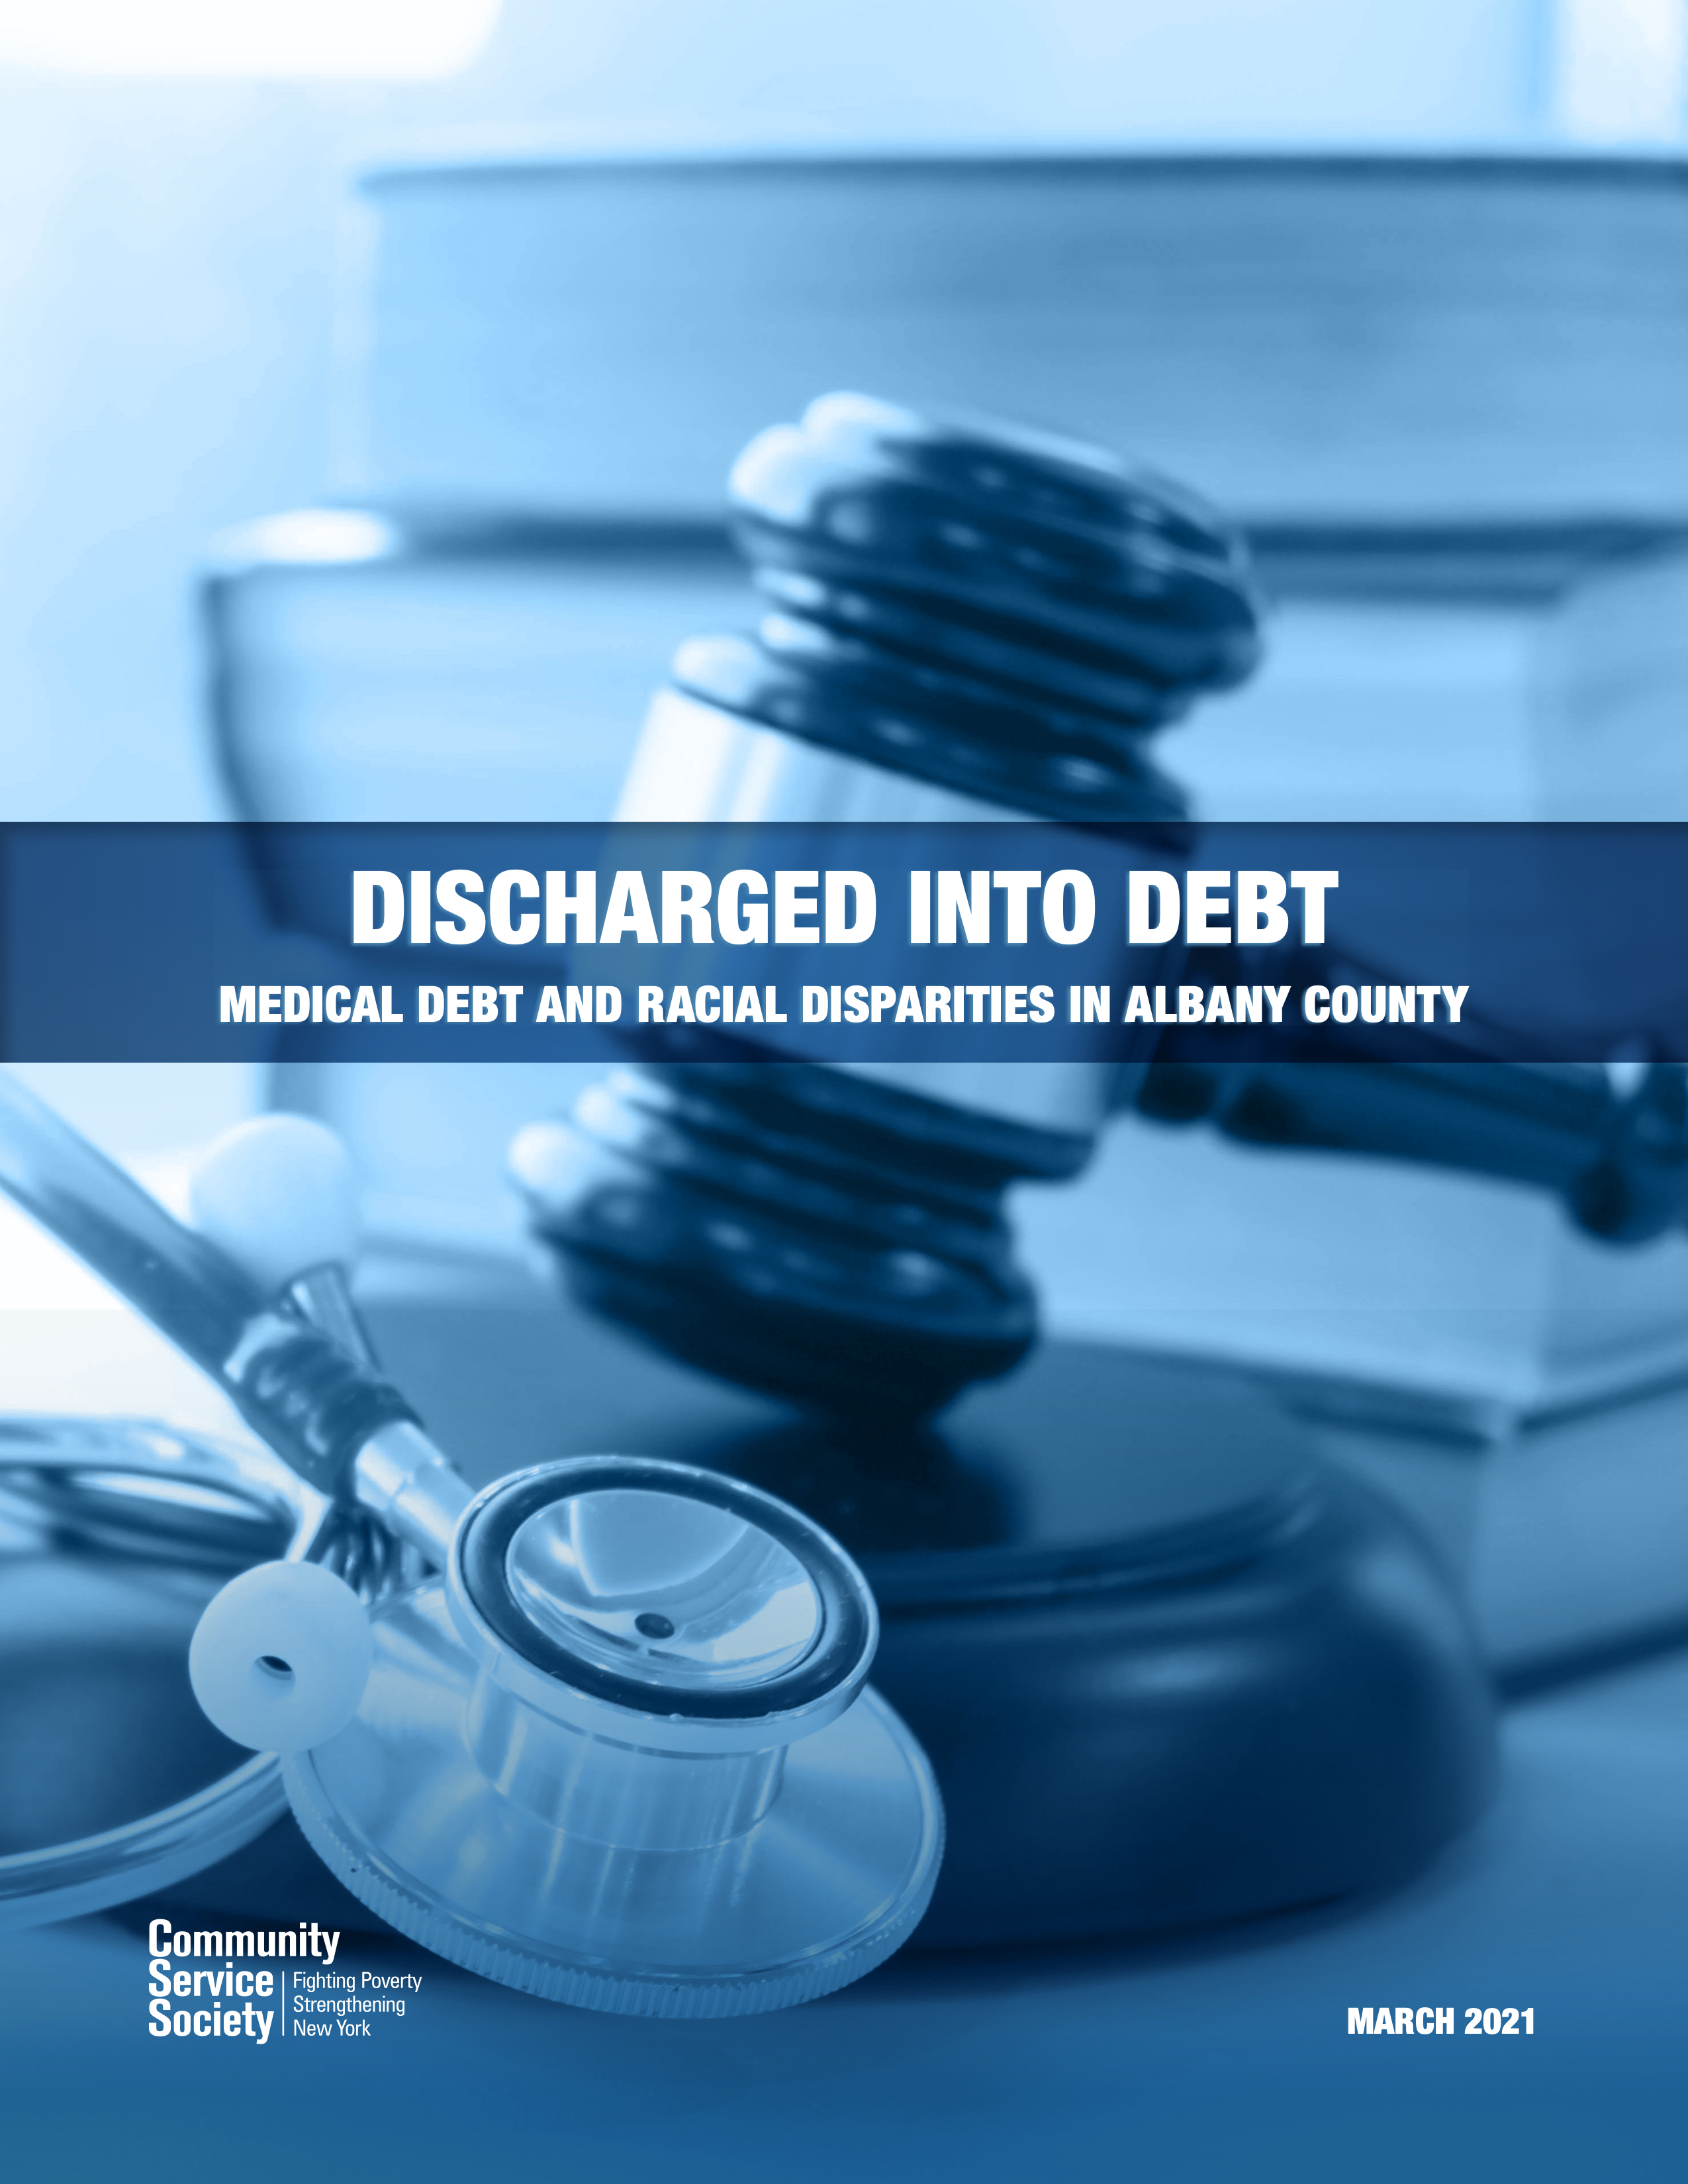 Discharged Into Debt: Medical Debt and Racial Disparities in Albany County